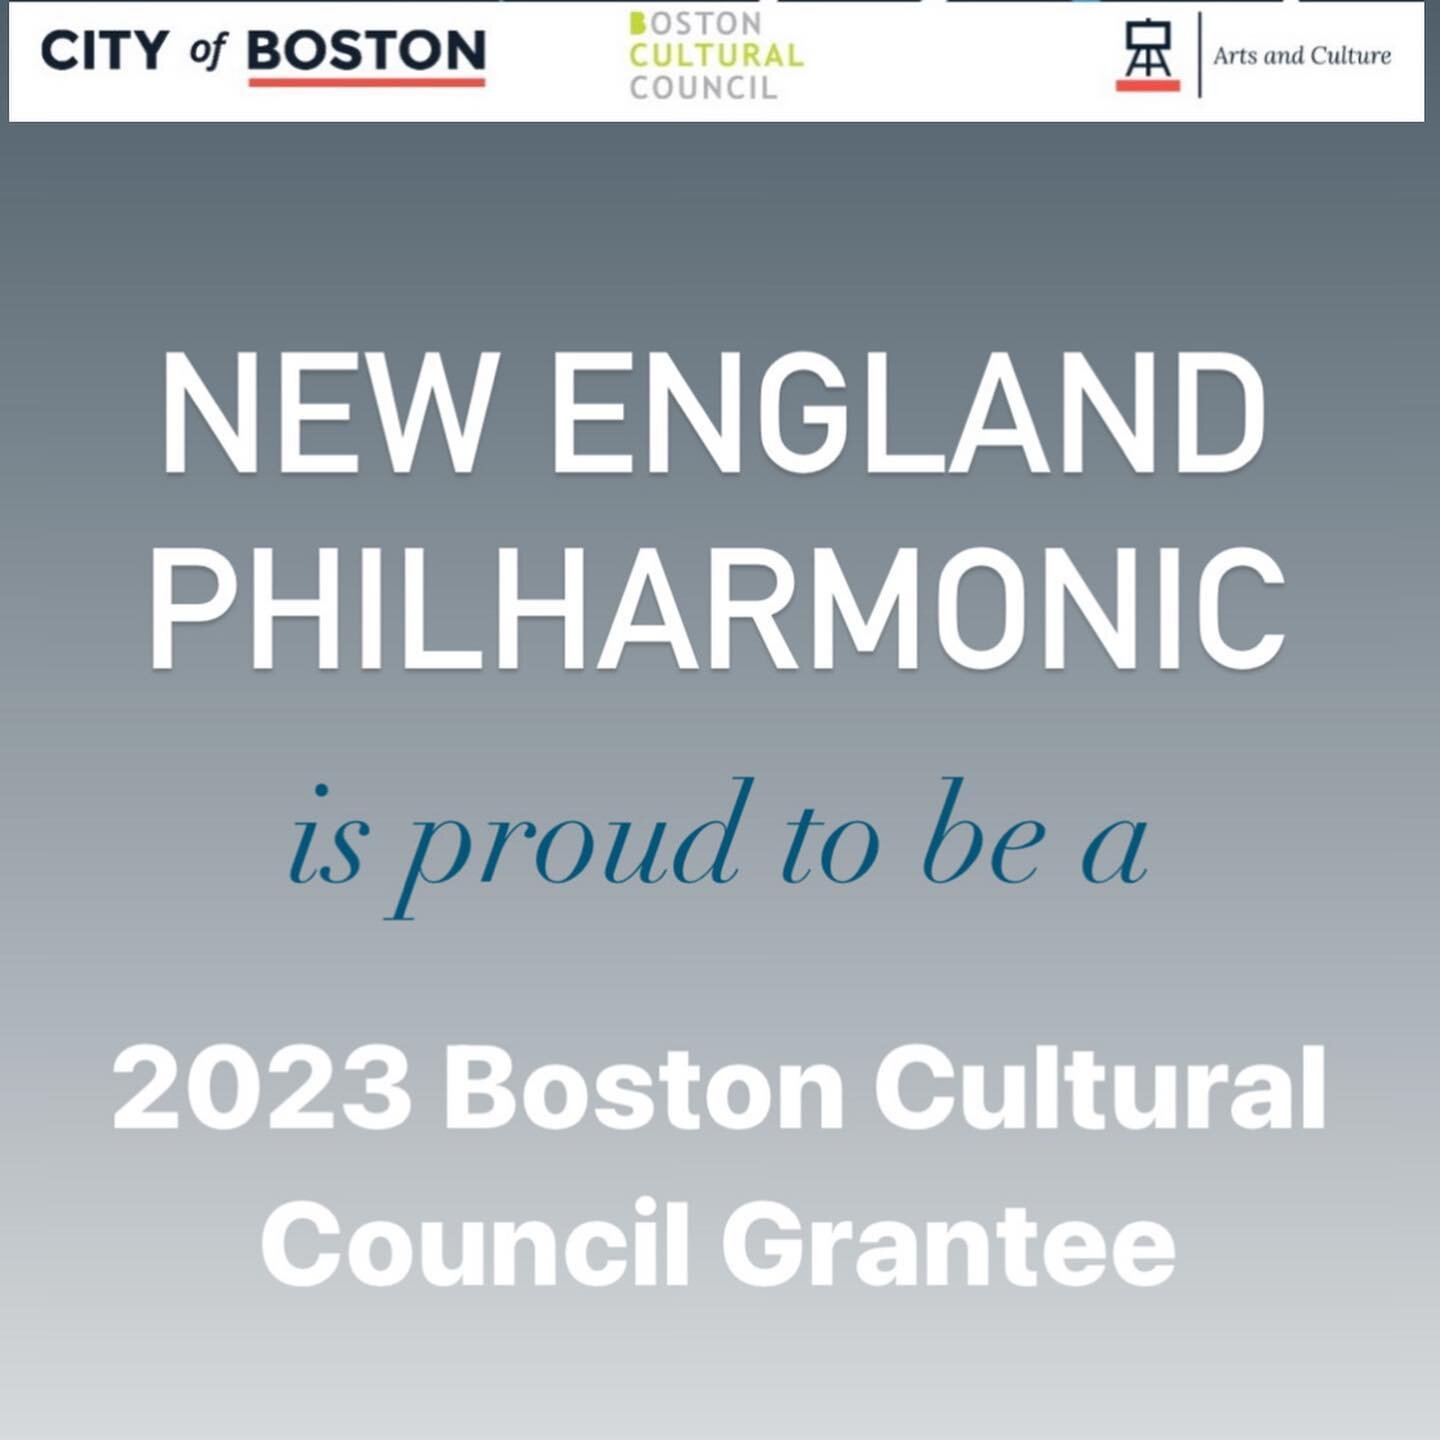 Thanks to @cityofboston @artsinboston and @thebostonculturalcouncil for their commitment to creating a diverse and vibrant culture in Boston!

#advocacy #arts #humanities #qualityoflife